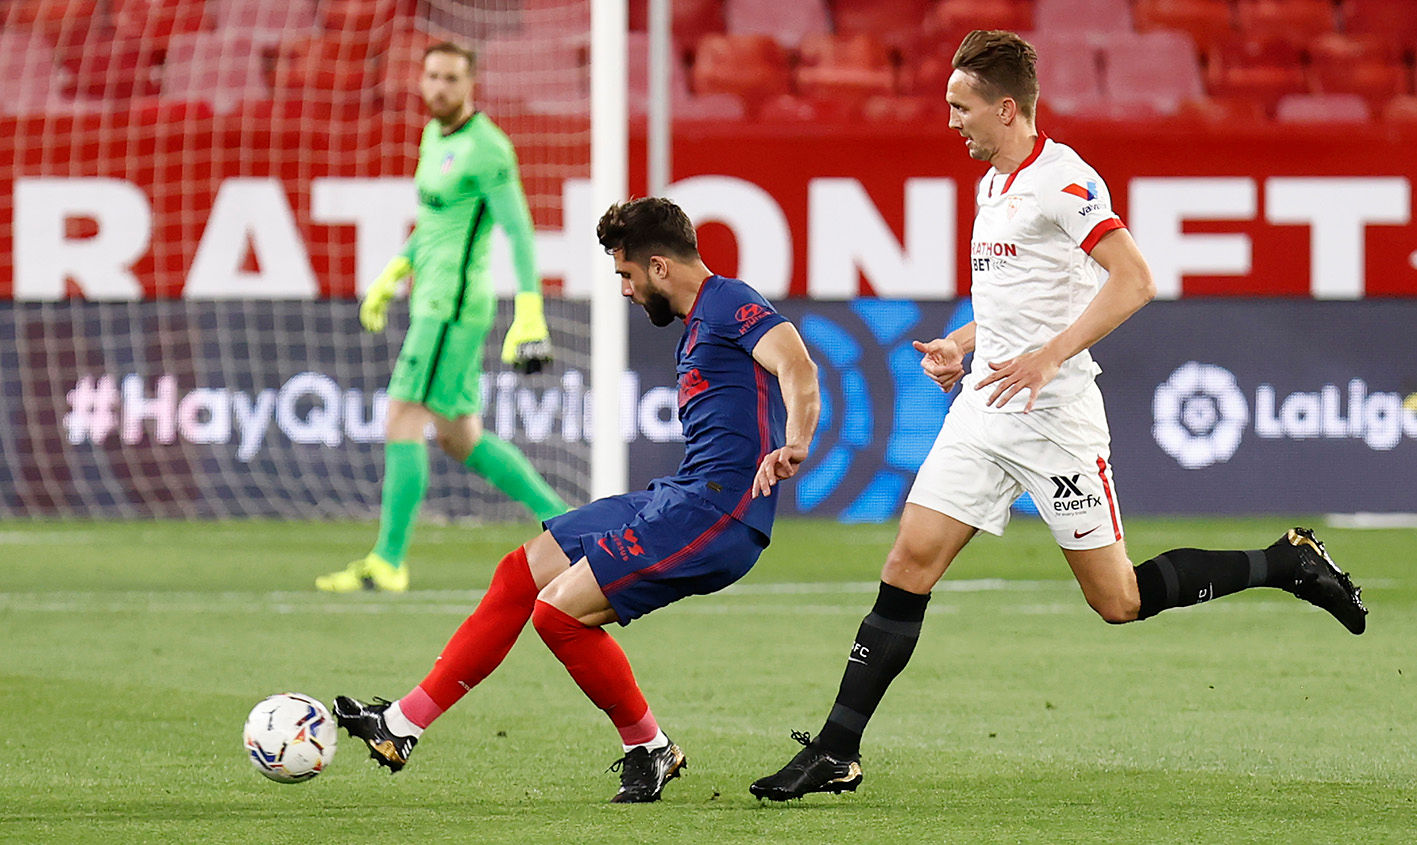 La Liga: Atletico suffer another setback in title race after Sevilla defeat